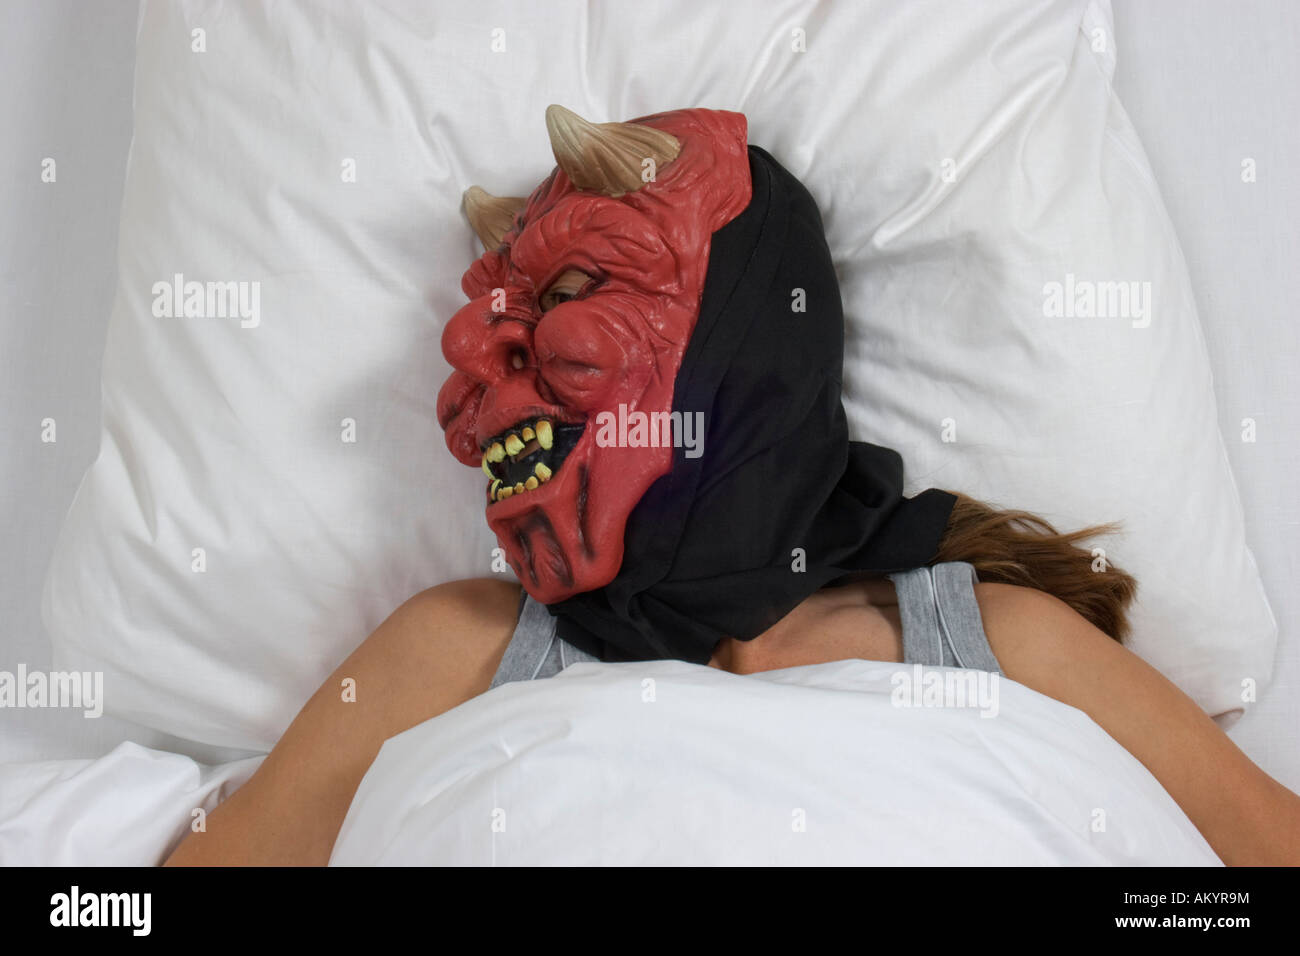 Sleeping woman with devil mask Stock Photo